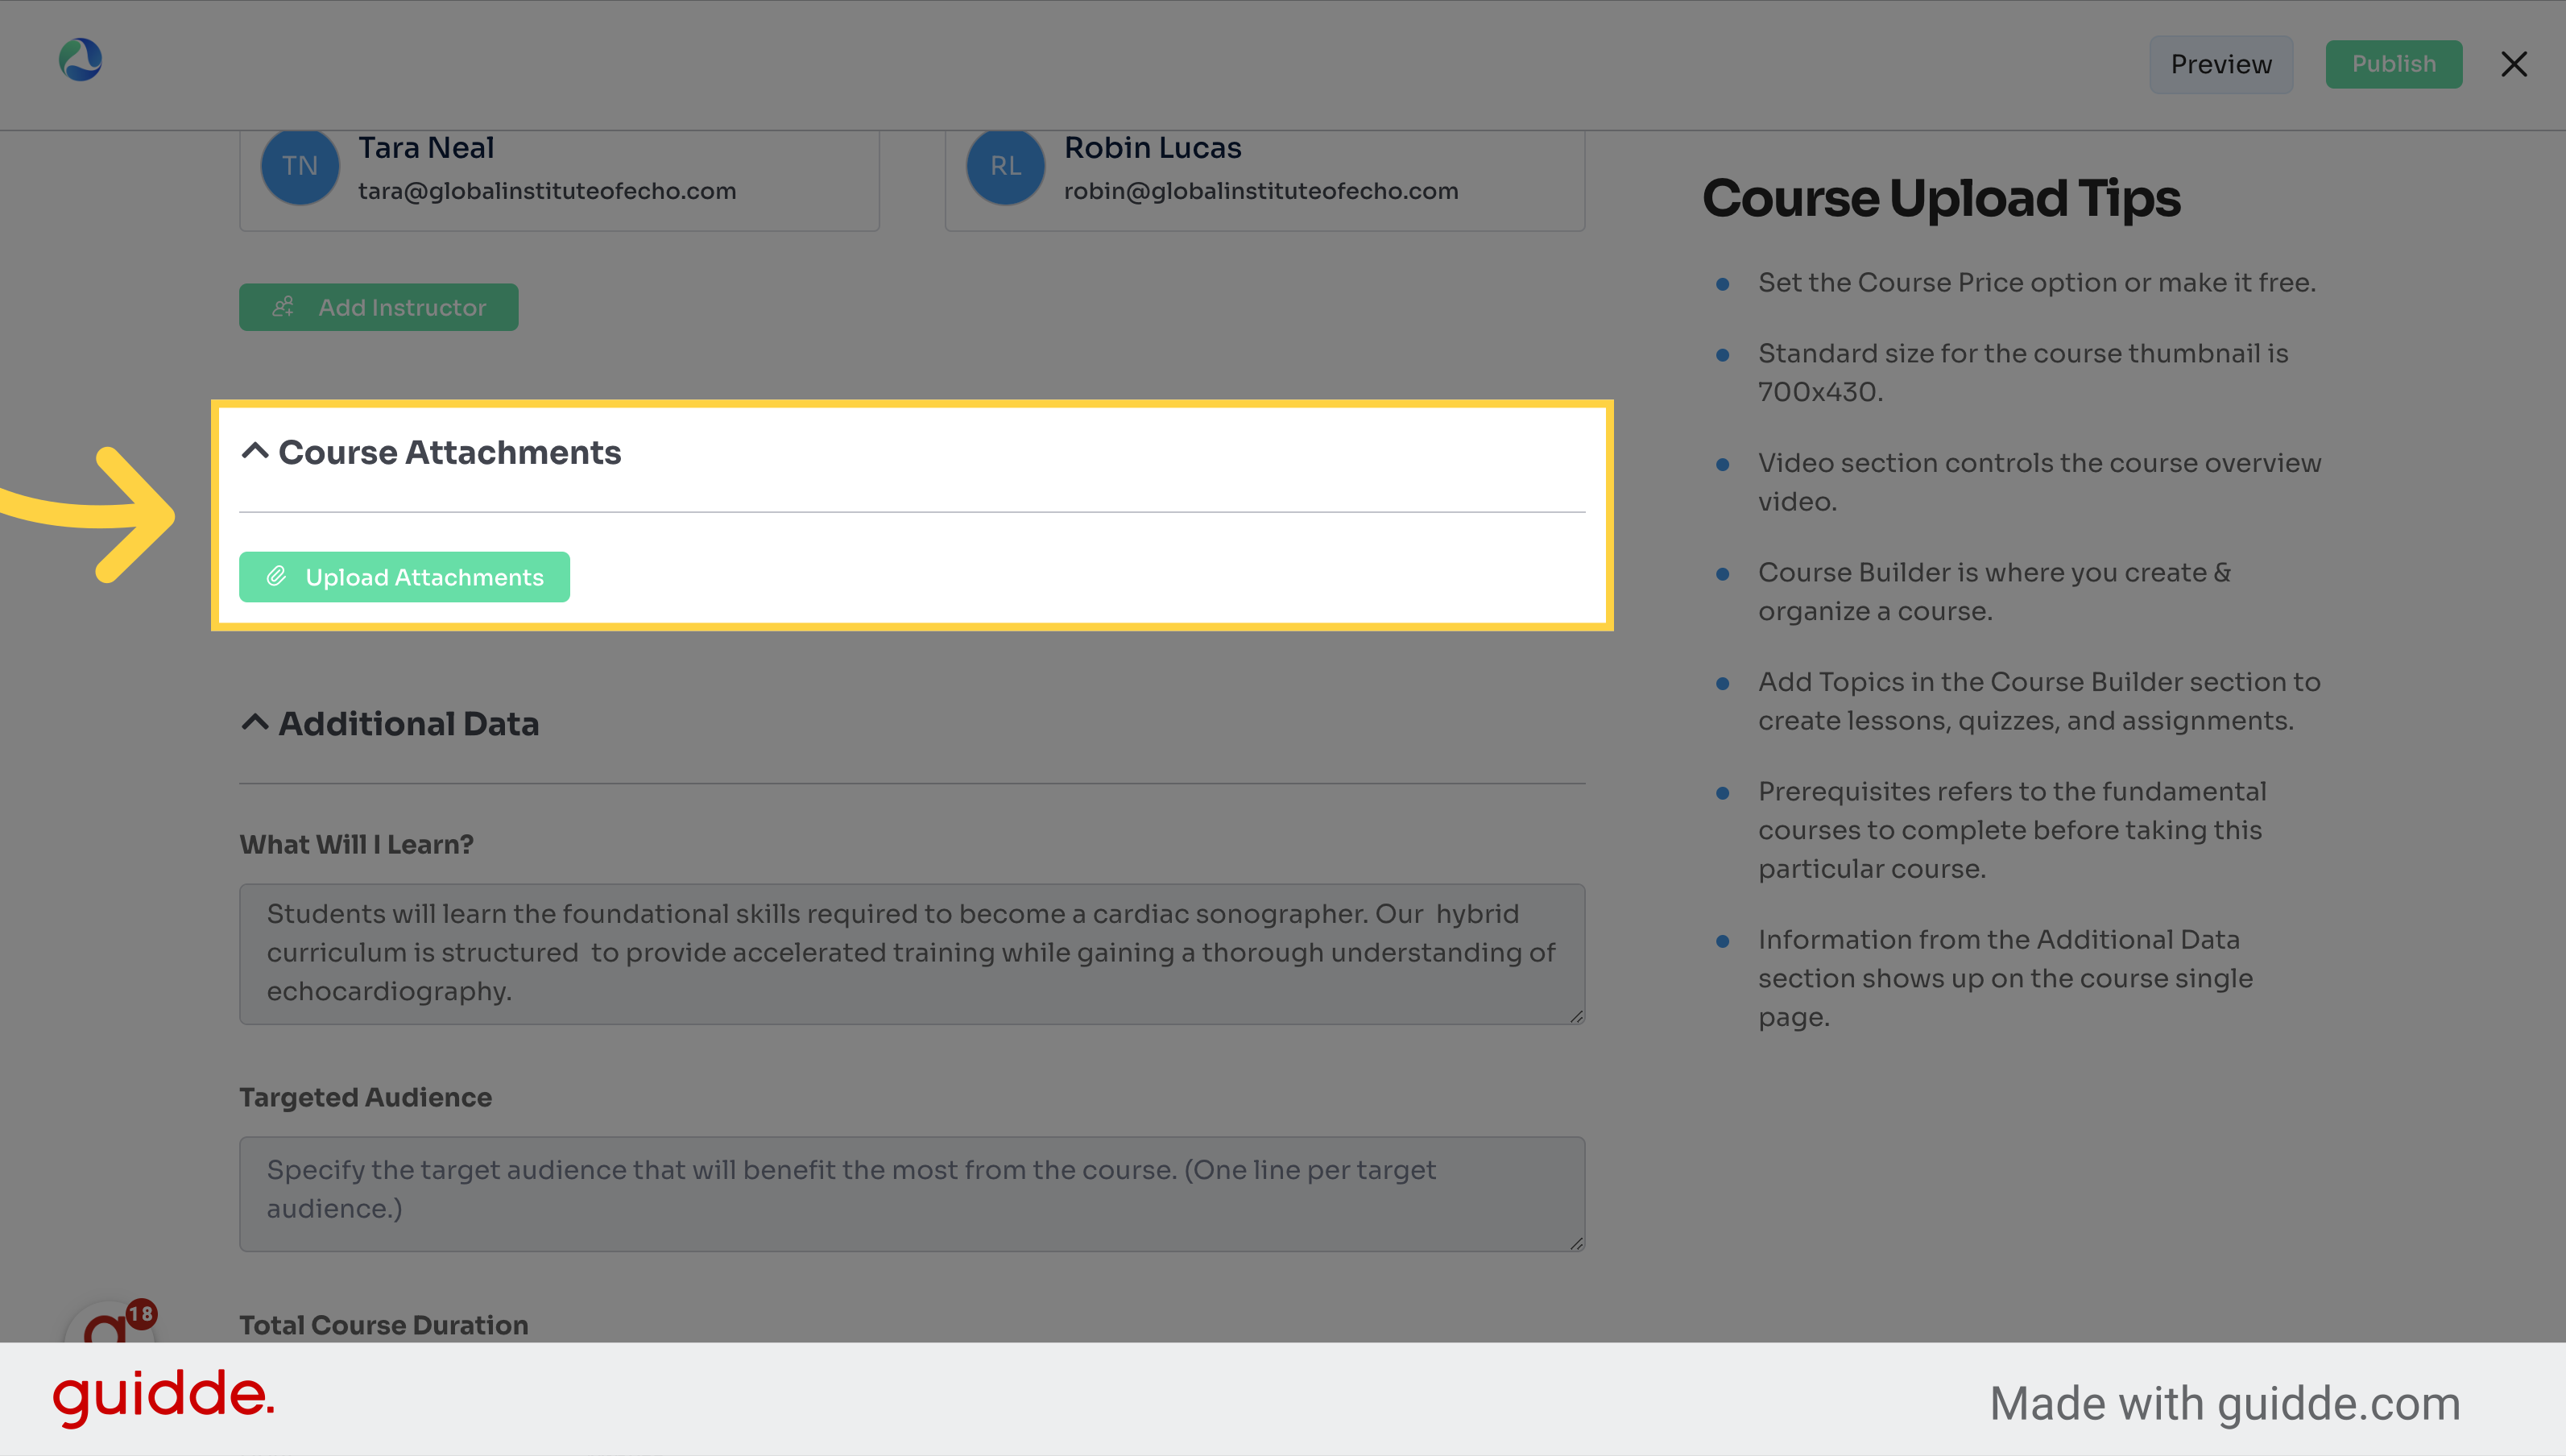 Click Course Attachments to add general course attachments. Lectures should be added to the individual Lectures within the Course Topics